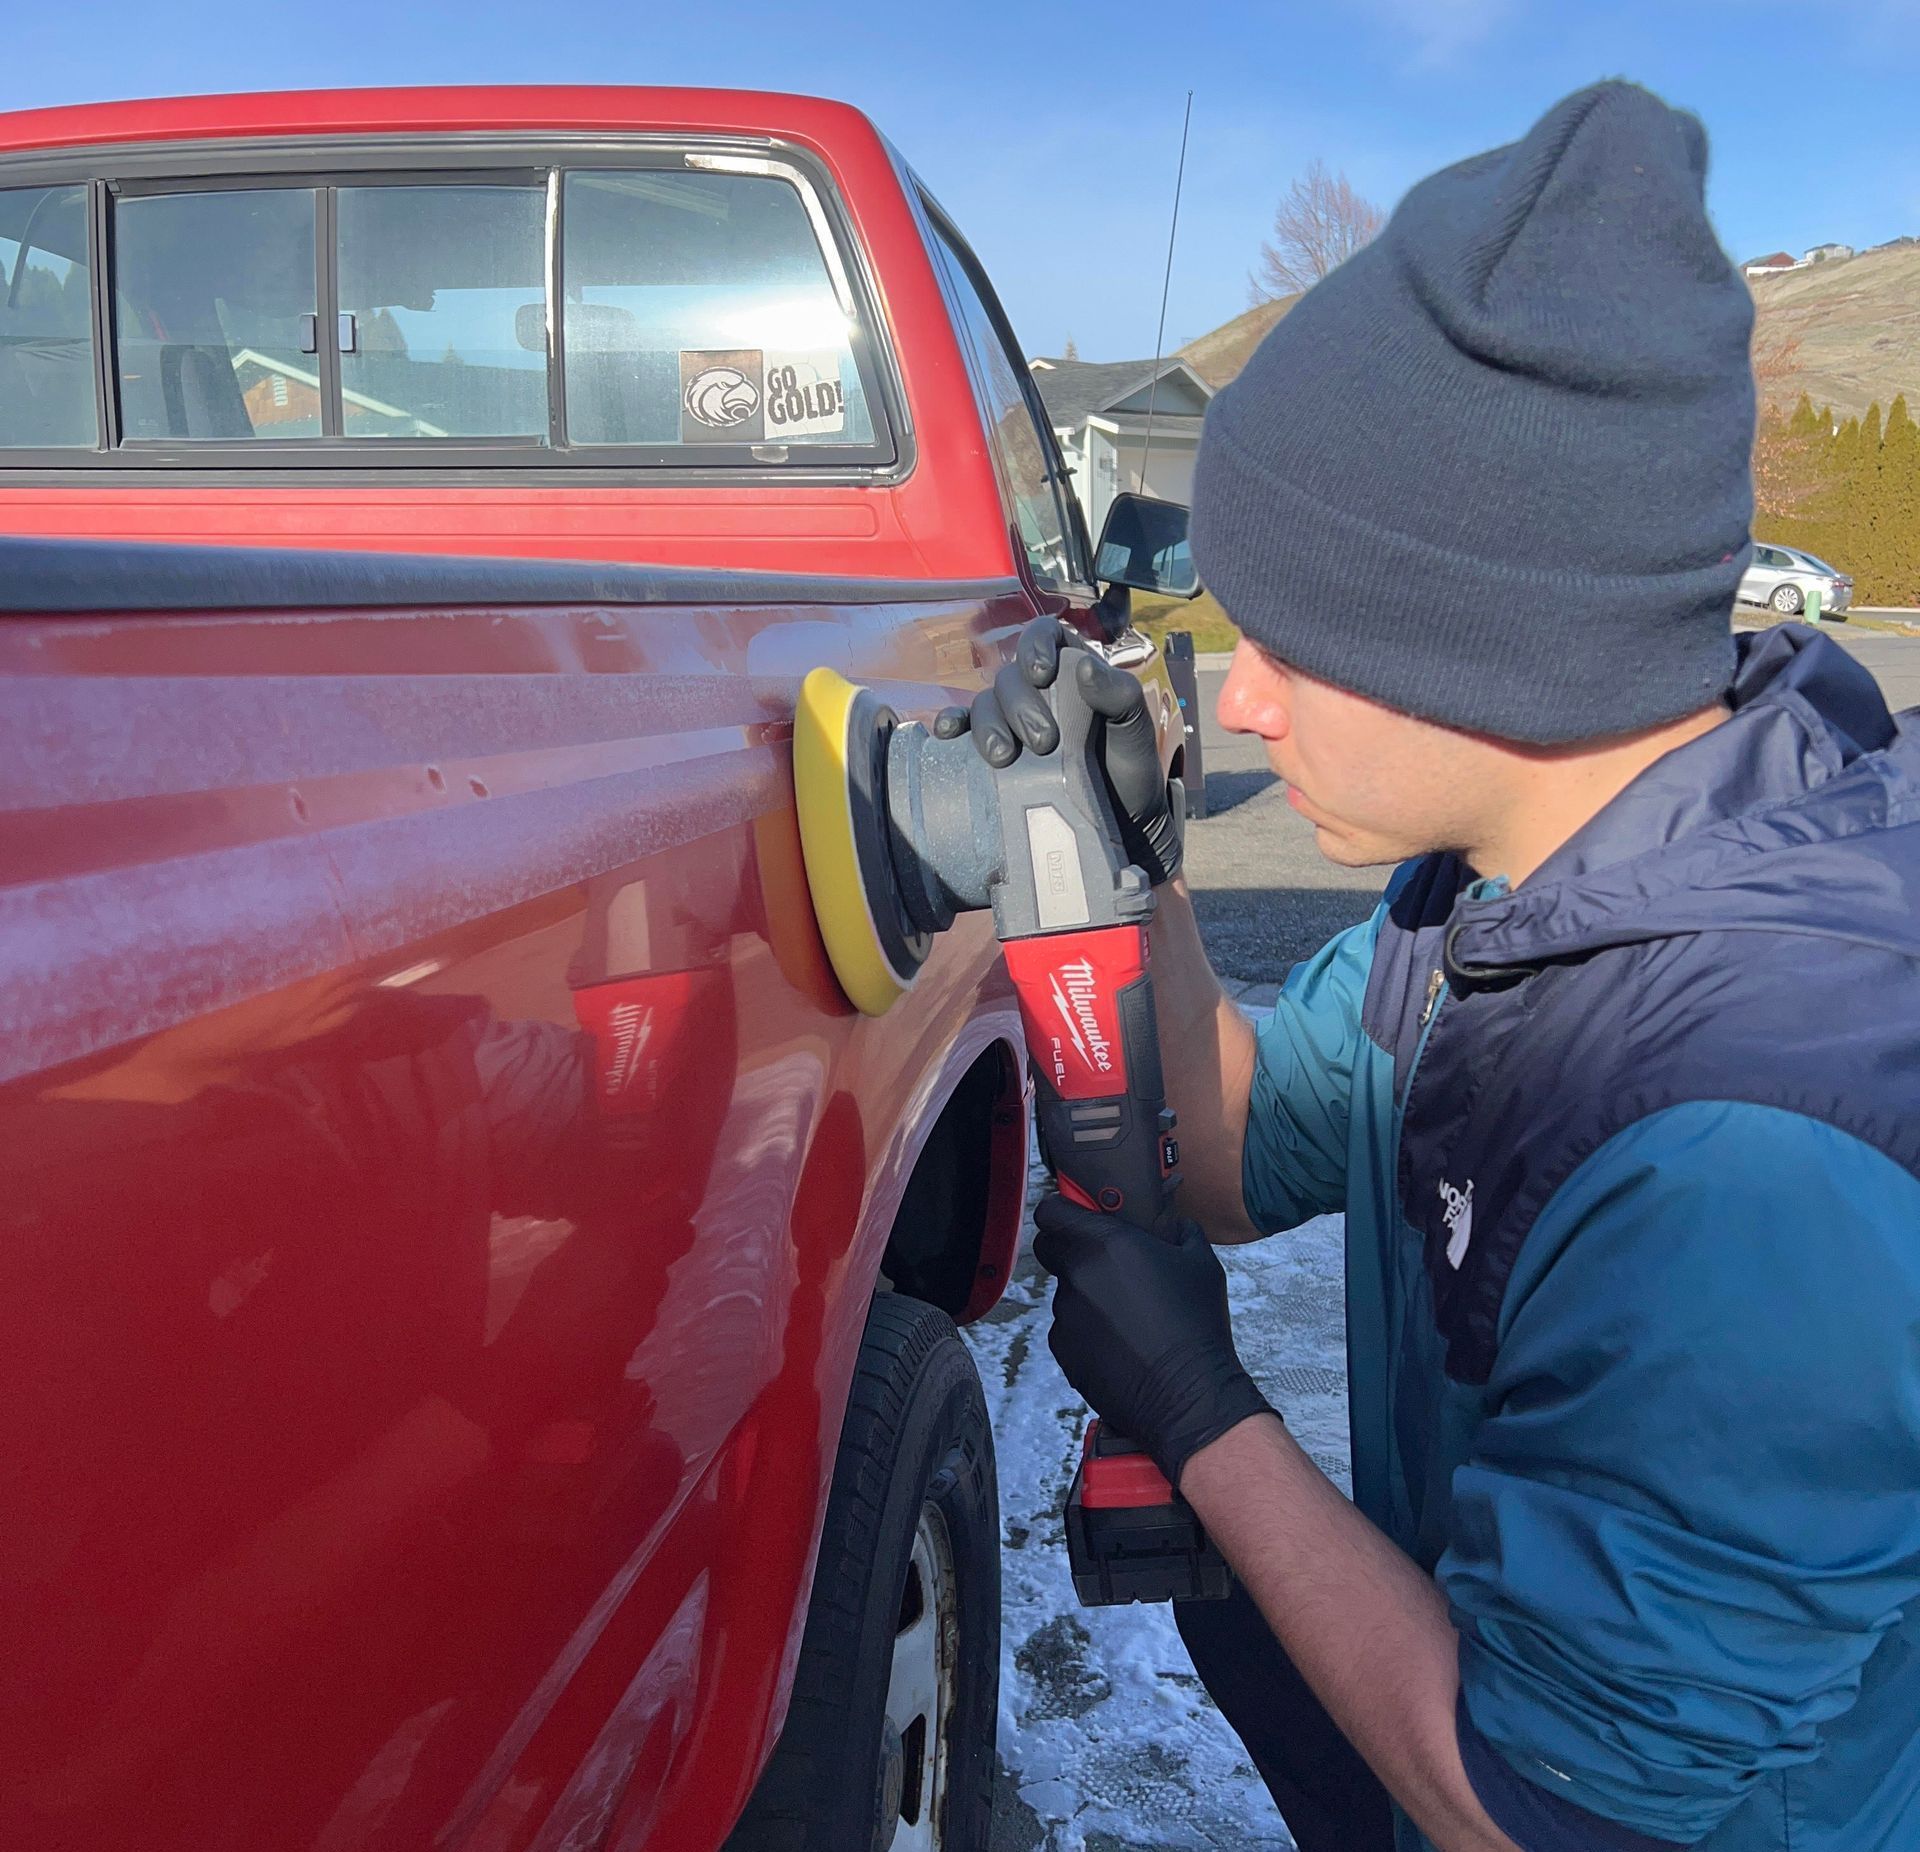 A man is polishing a red truck with a polisher